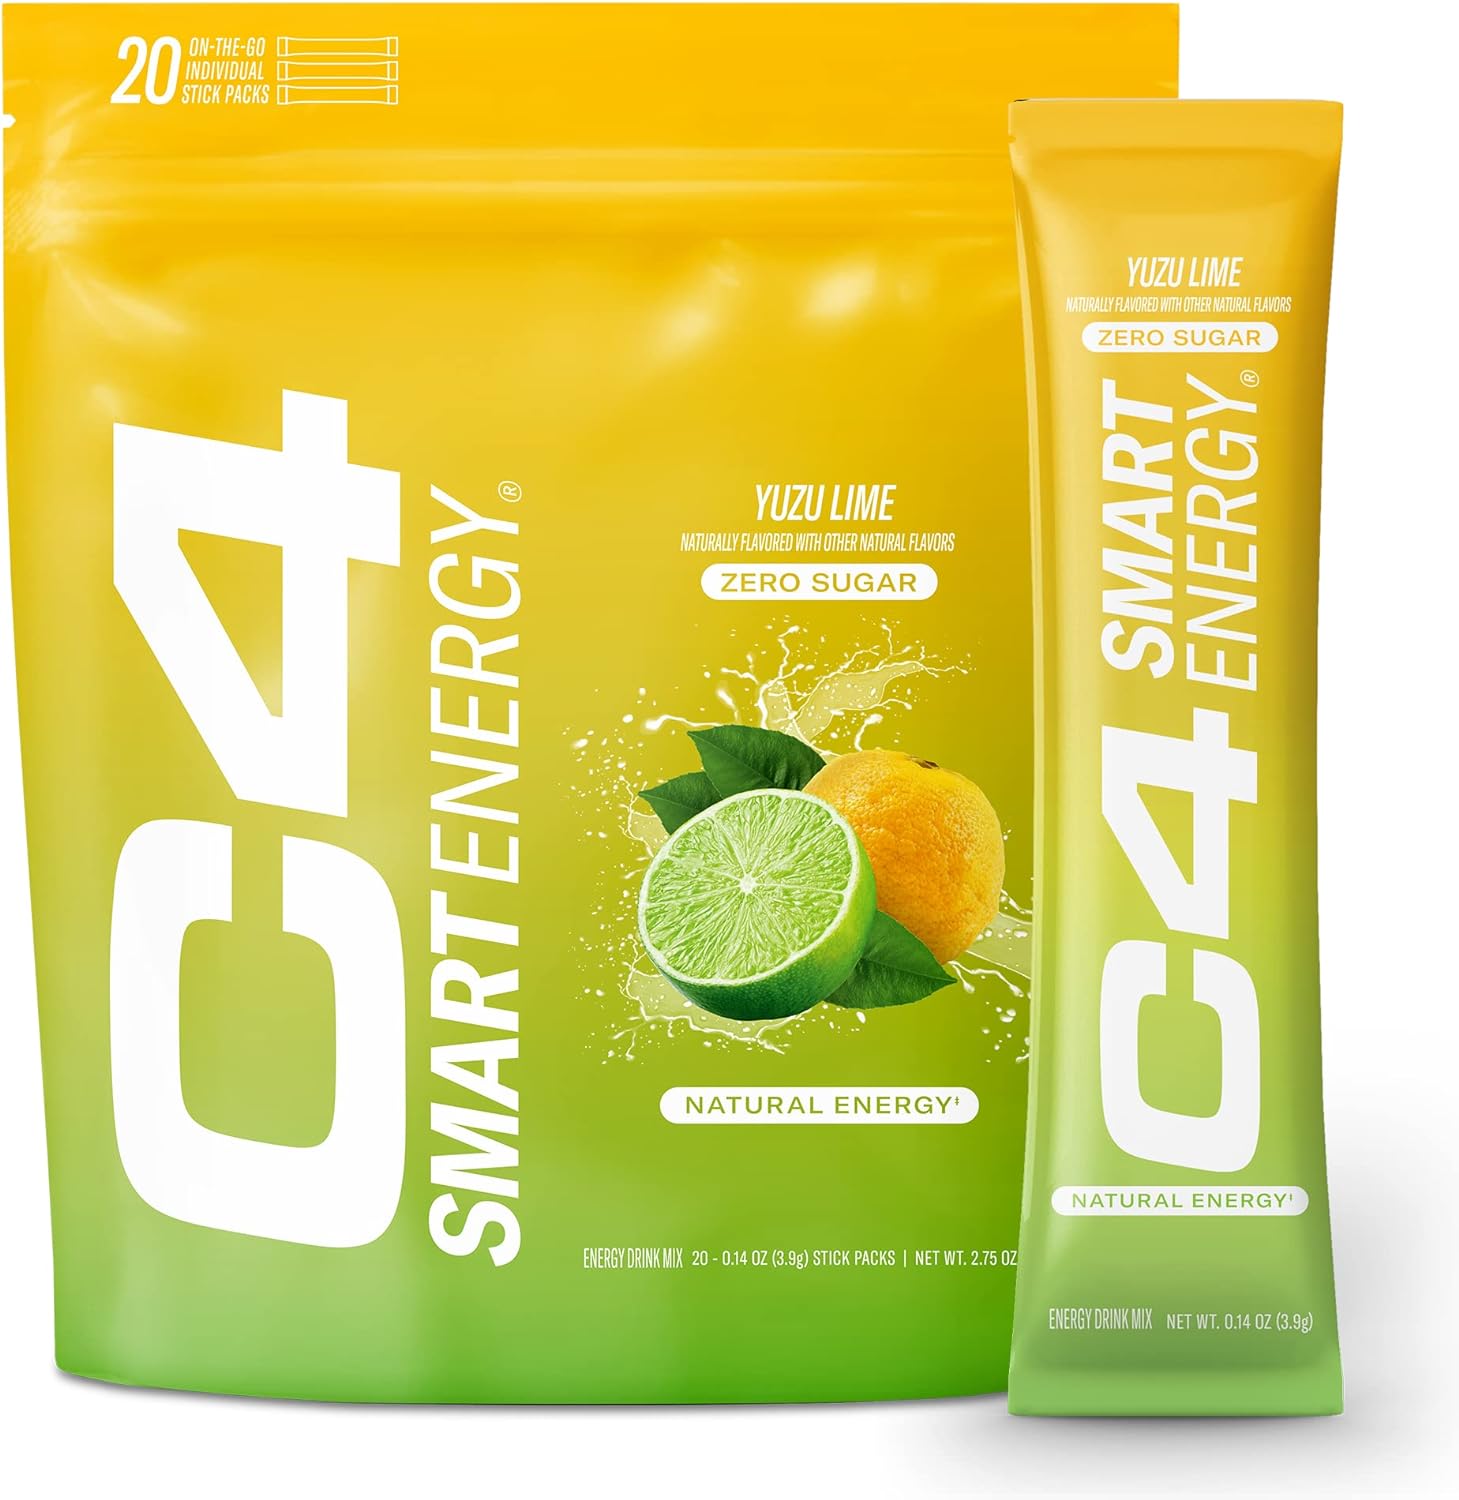 C4 Smart Energy Powder Stick Packs - Sugar Free Performance Fuel & Nootropic Brain Booster, Coffee Substitute or Alternative | Yuzu Lime - 20 Count